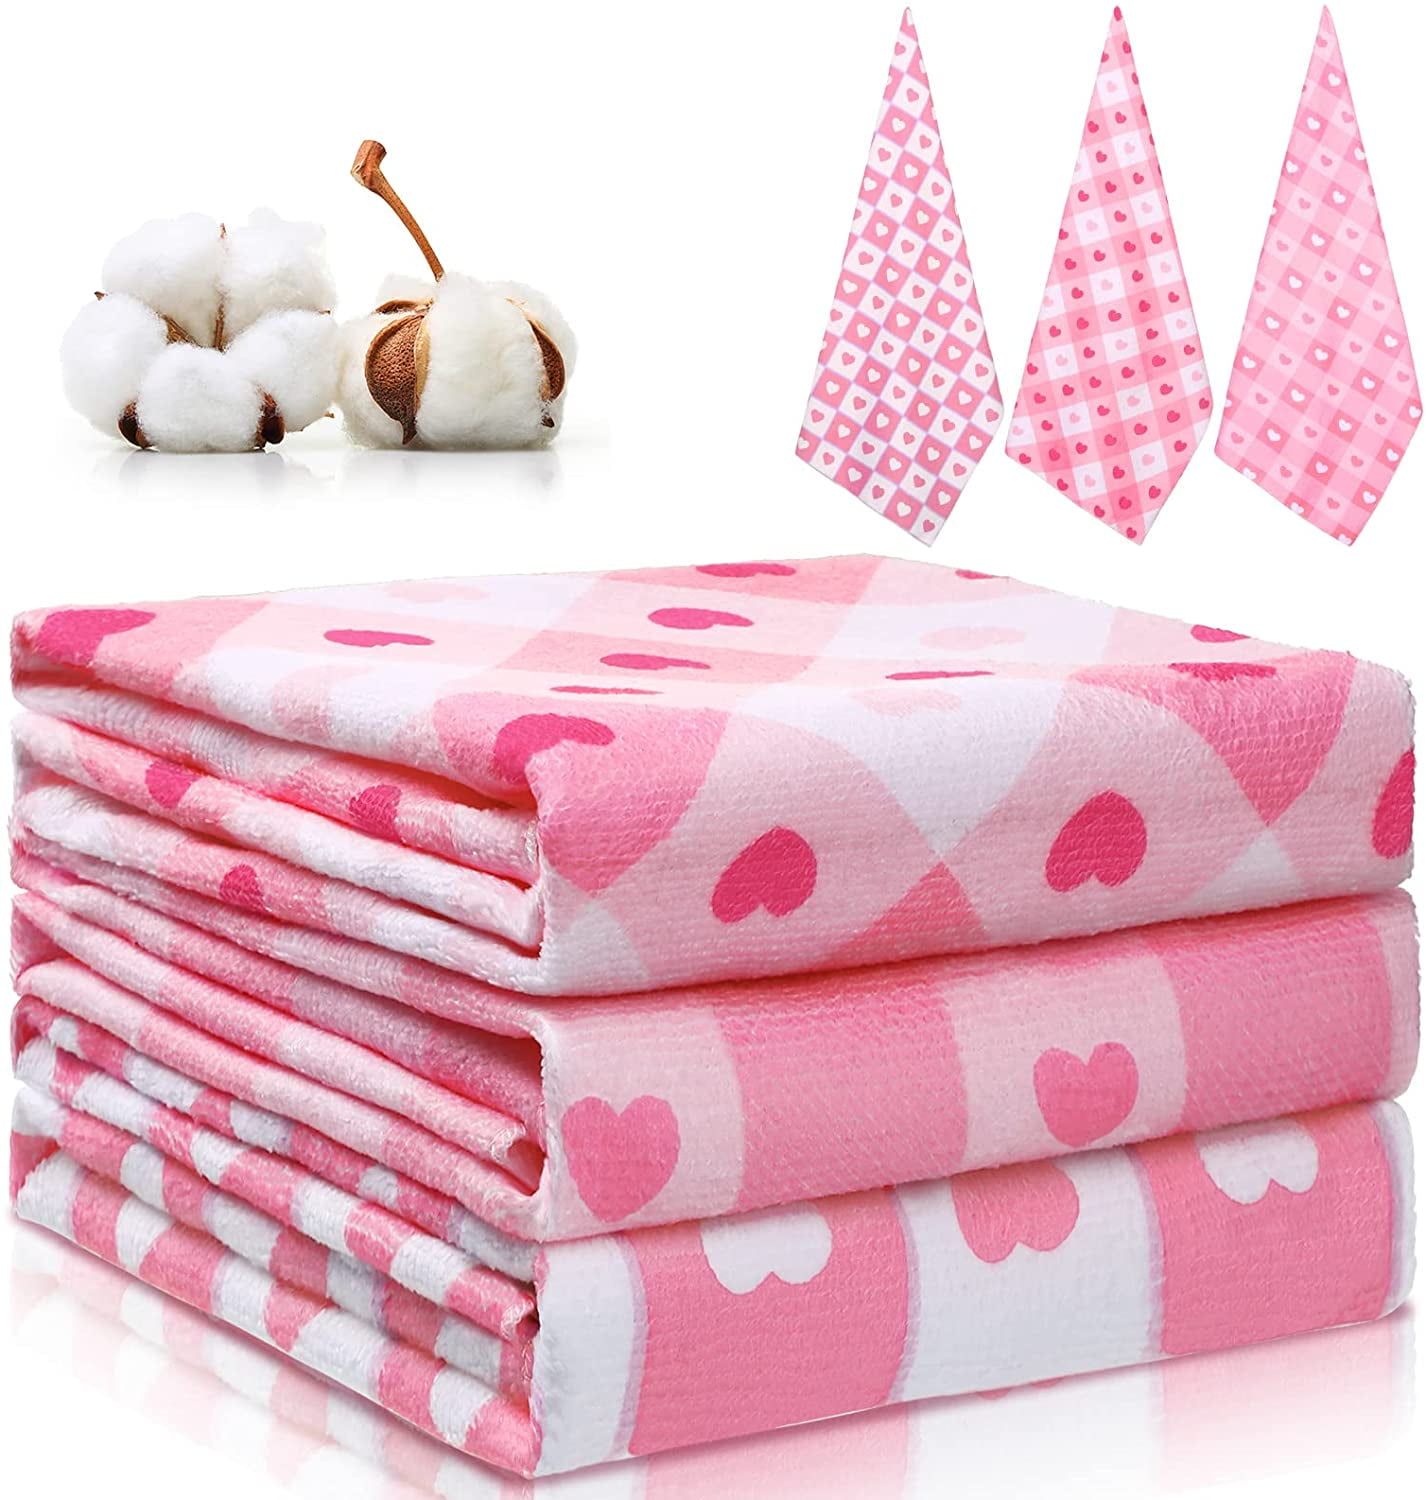 Romantic Truck Heart Balloon Hand Towels 16x30 in Love Car Sweet Travel Bathroom Towel Ultra Soft Highly Absorbent Small Bath Towel Kitchen Dish Guest Towel Mother's Valentine's Day Decorations 